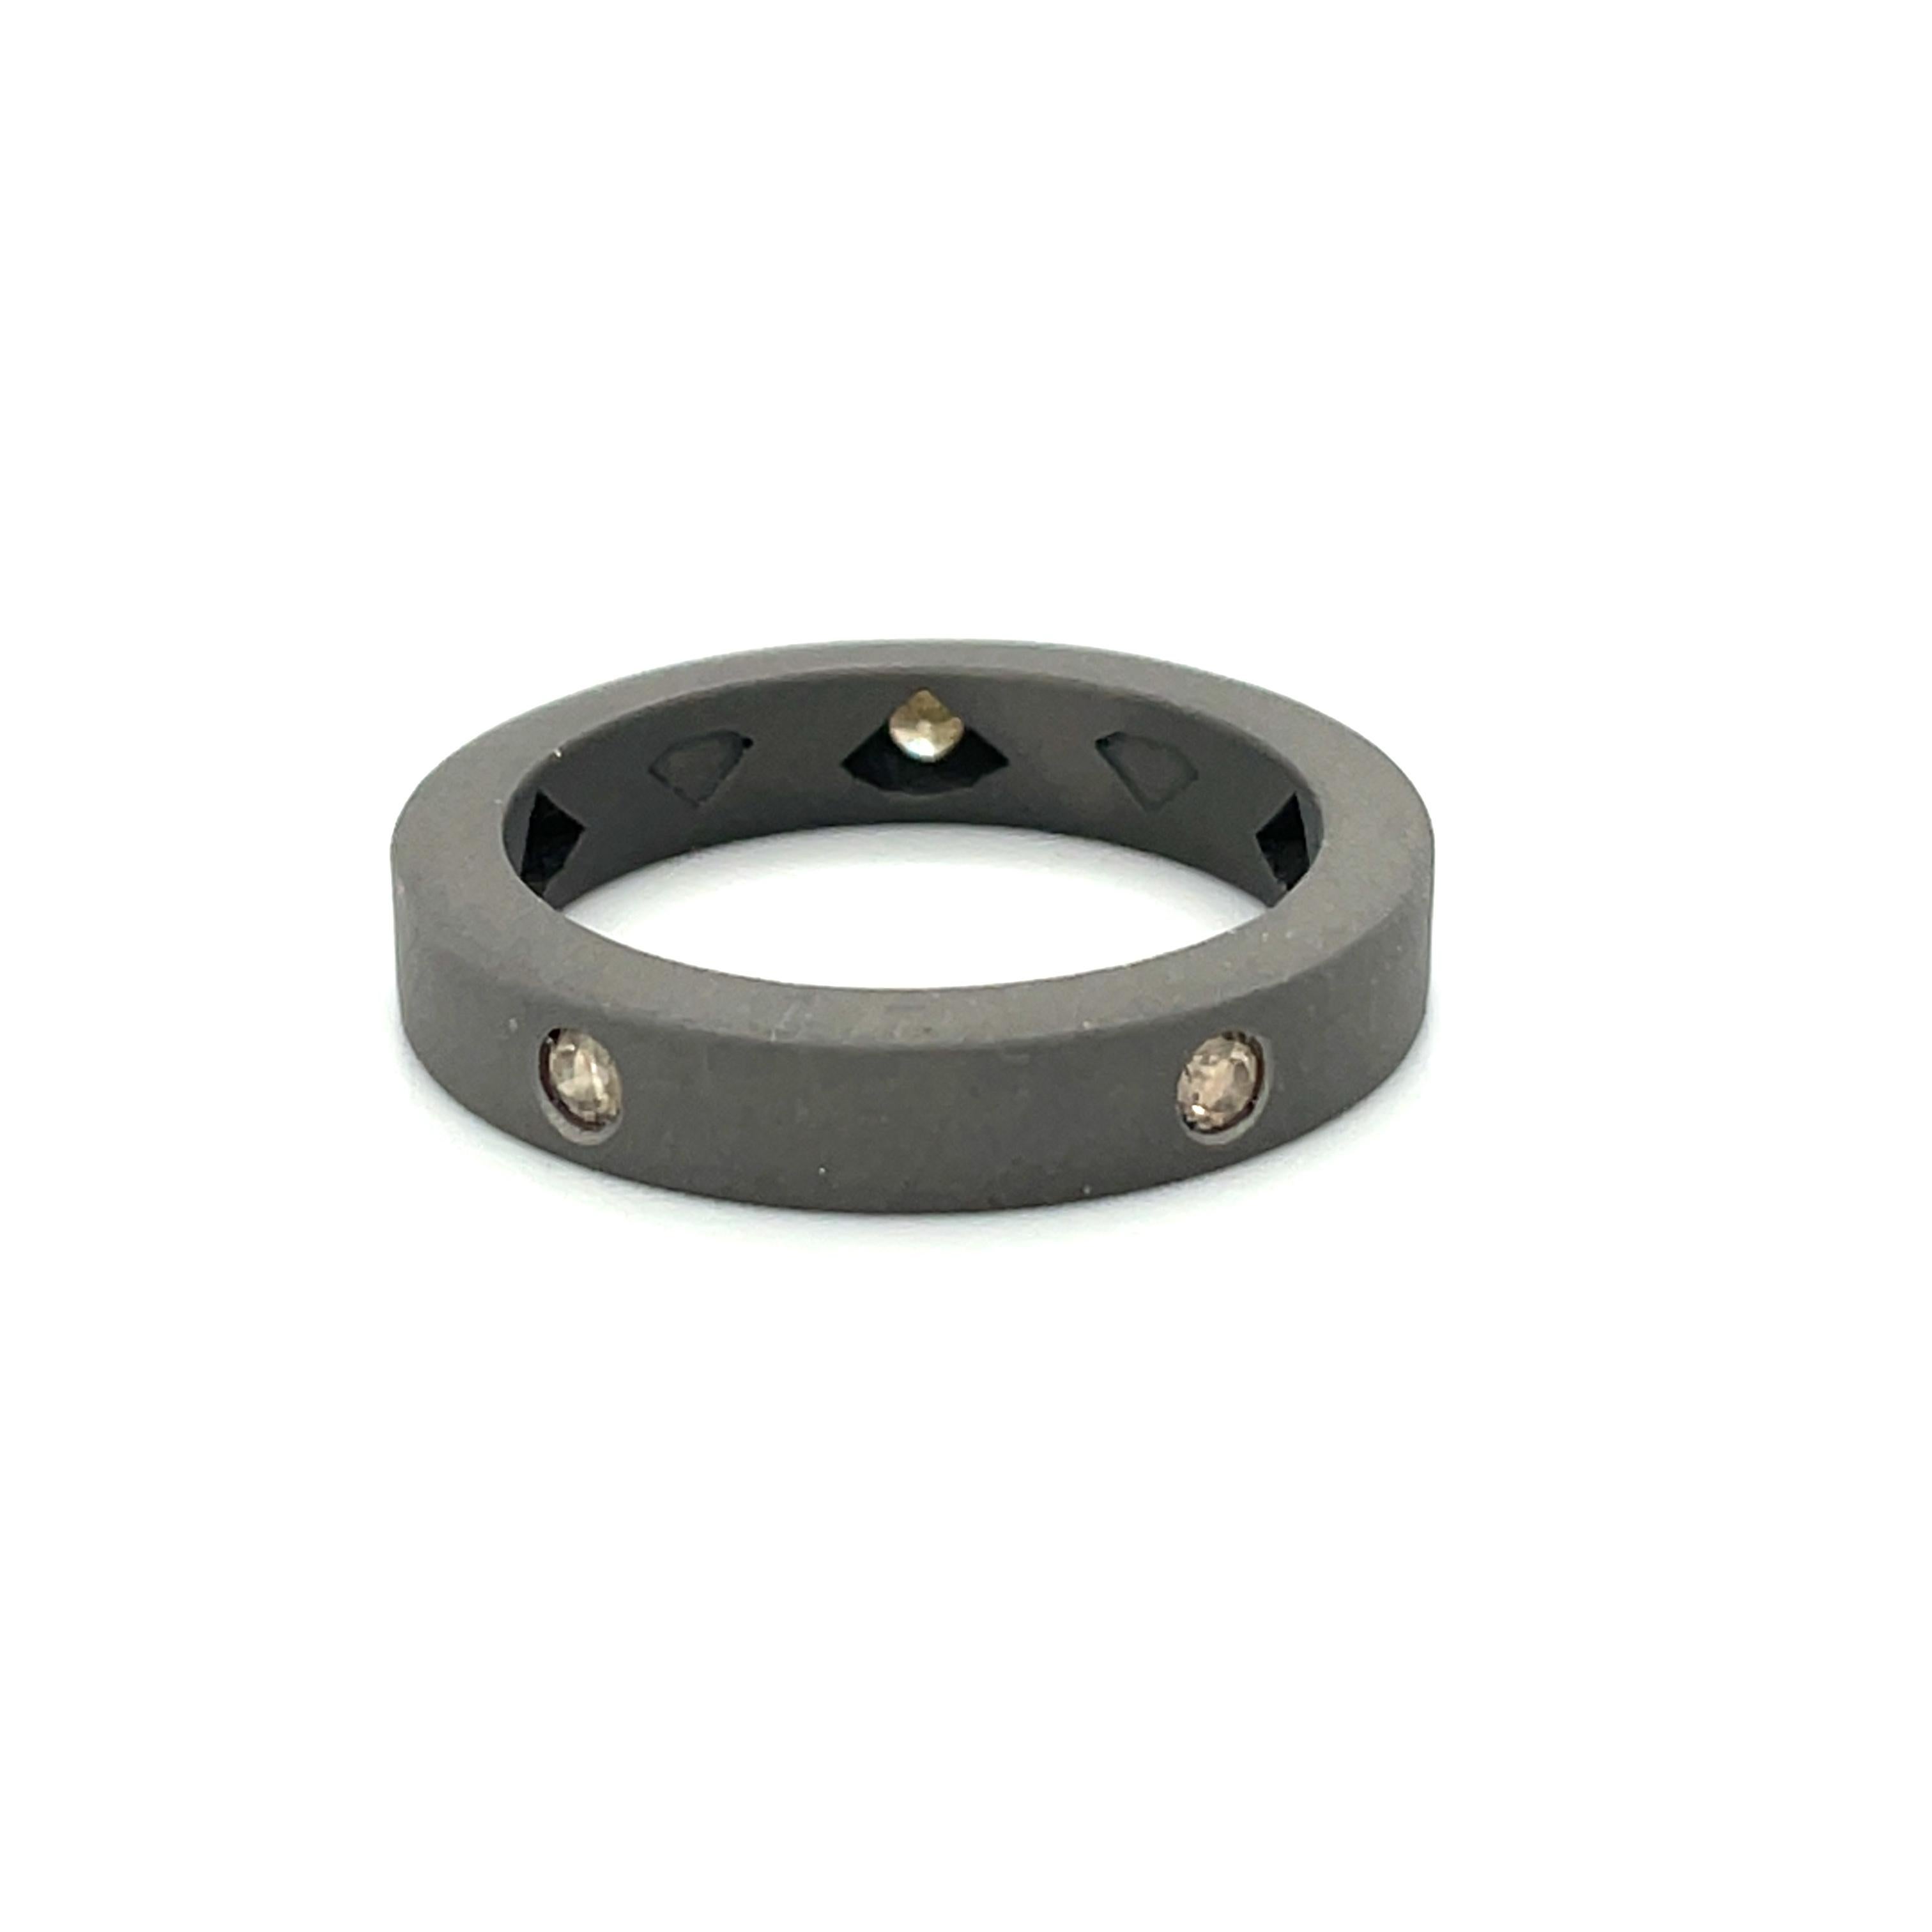 Titanium band ring is from our Heroes Collection. This masculine ring is decorated by round brown diamond in total of 0.25 Carat. The ring size is 60mm/9 US size and it is not resizable. Perfect for stylish look!

The men’s collection is a